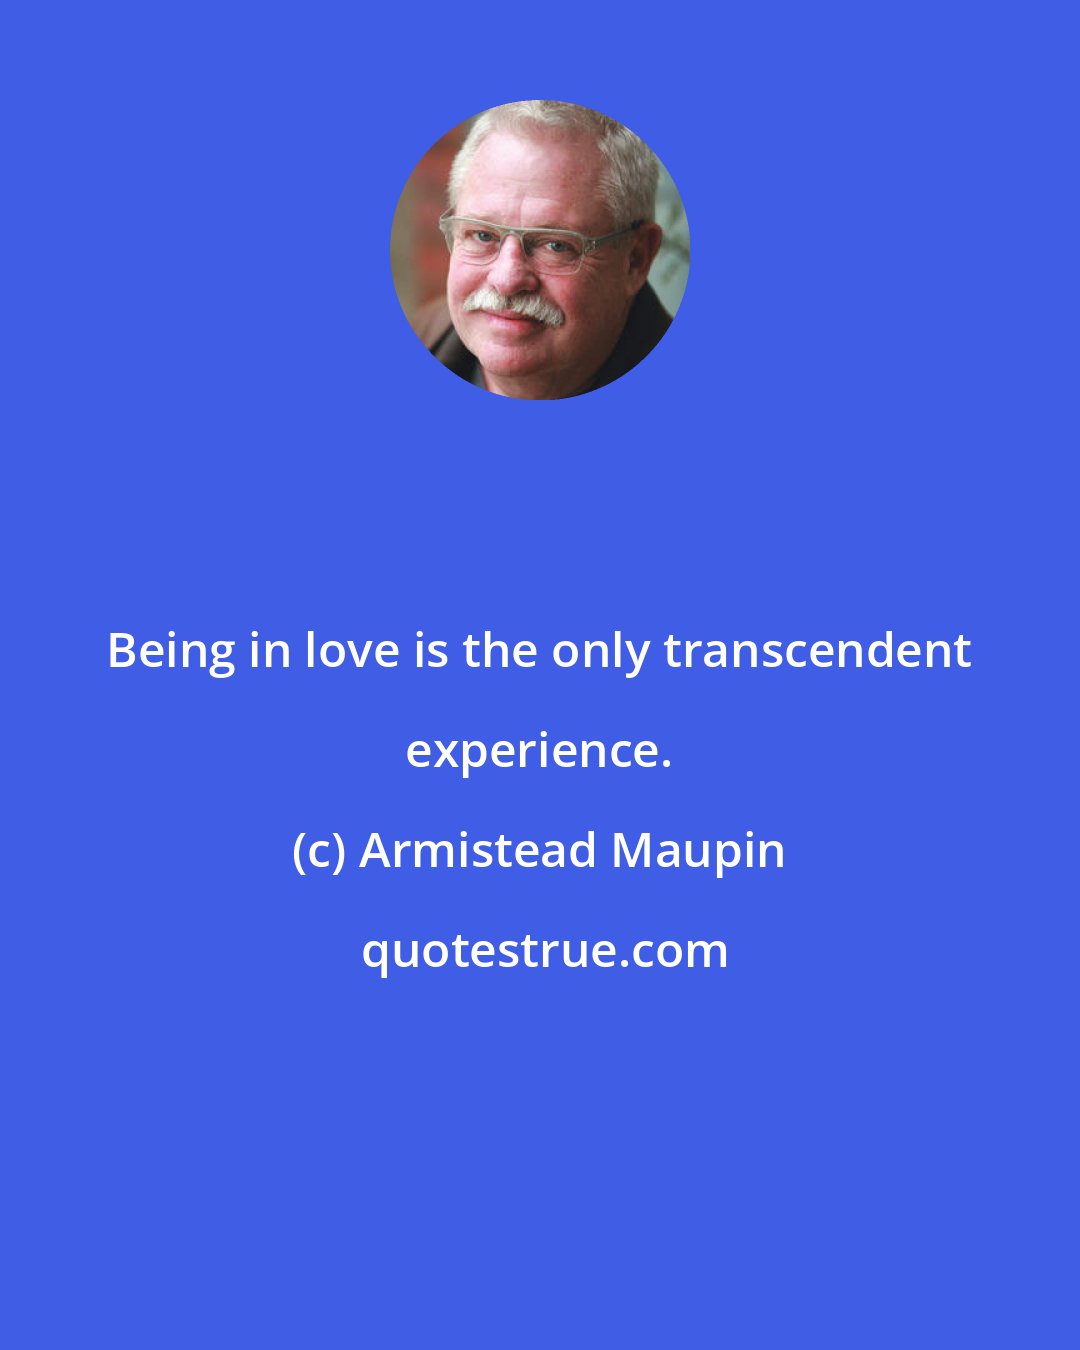 Armistead Maupin: Being in love is the only transcendent experience.